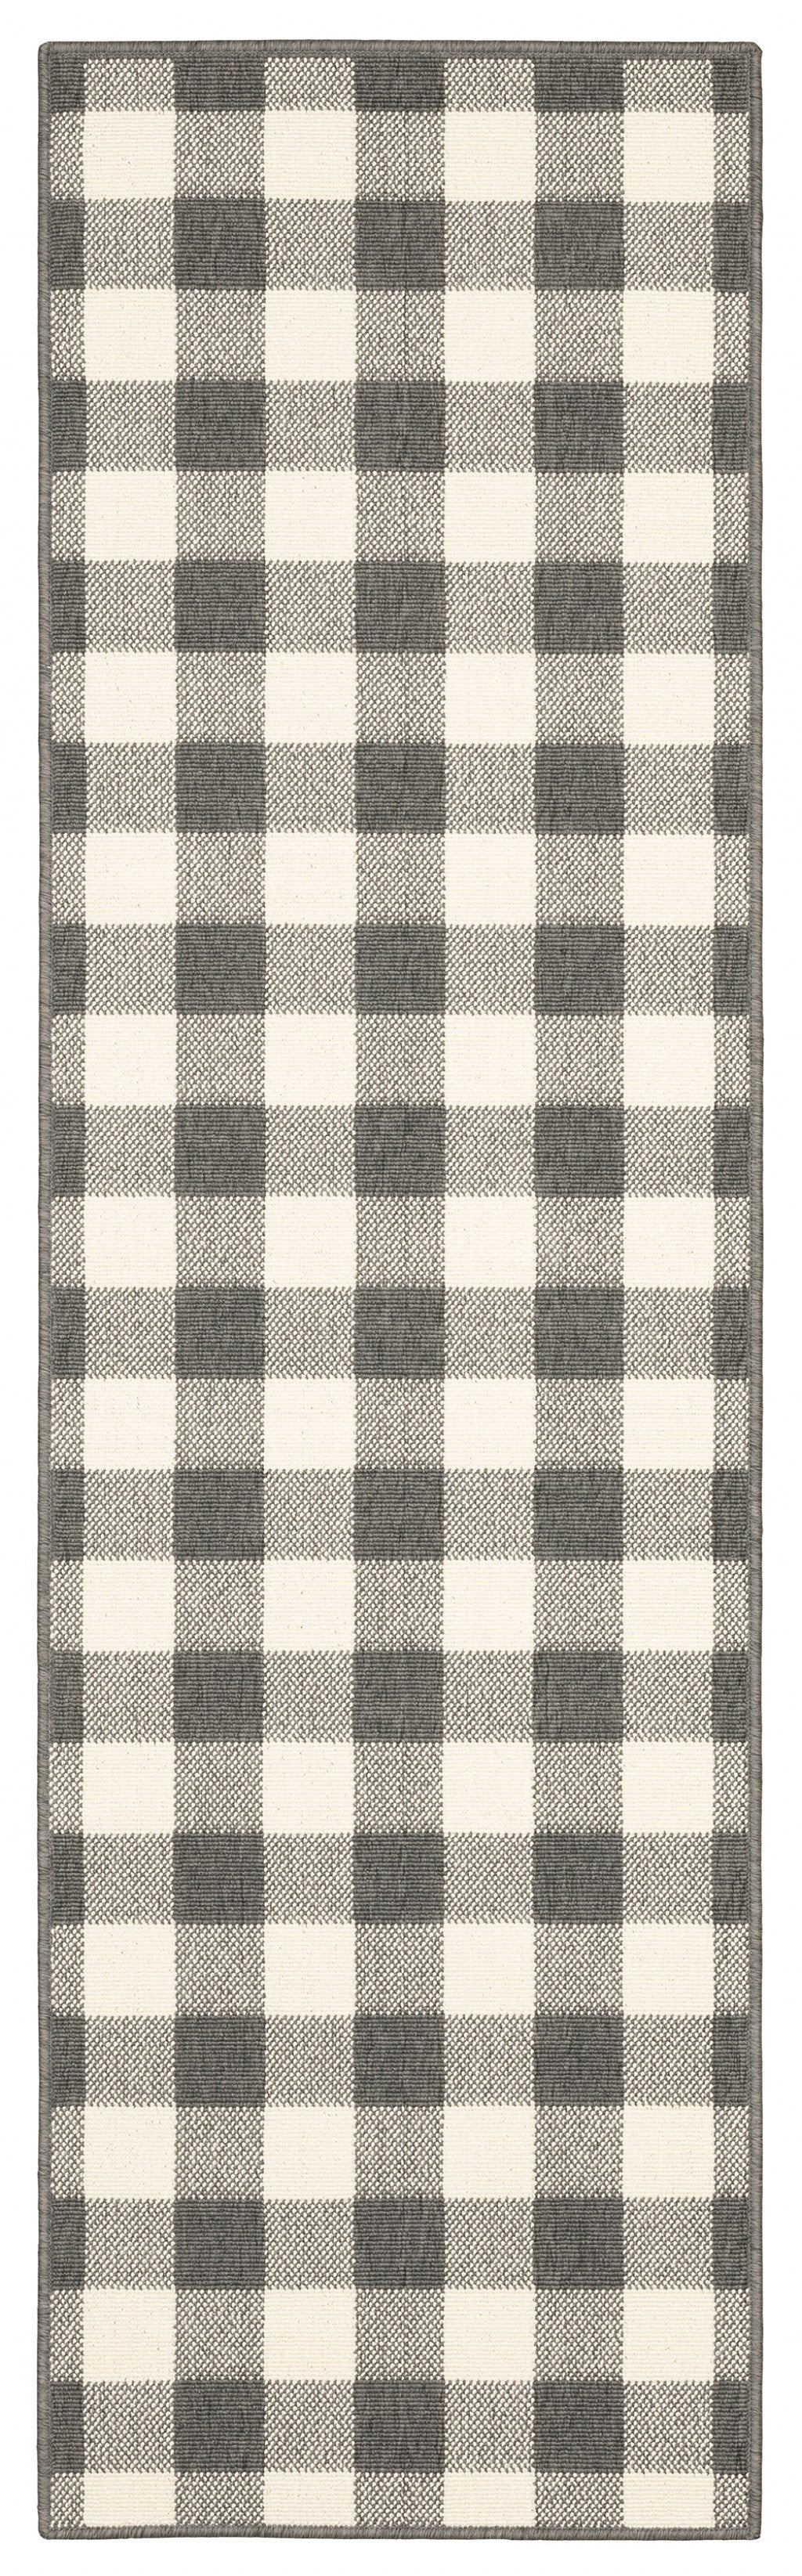 4' x 6' Gray and Ivory Indoor Outdoor Area Rug